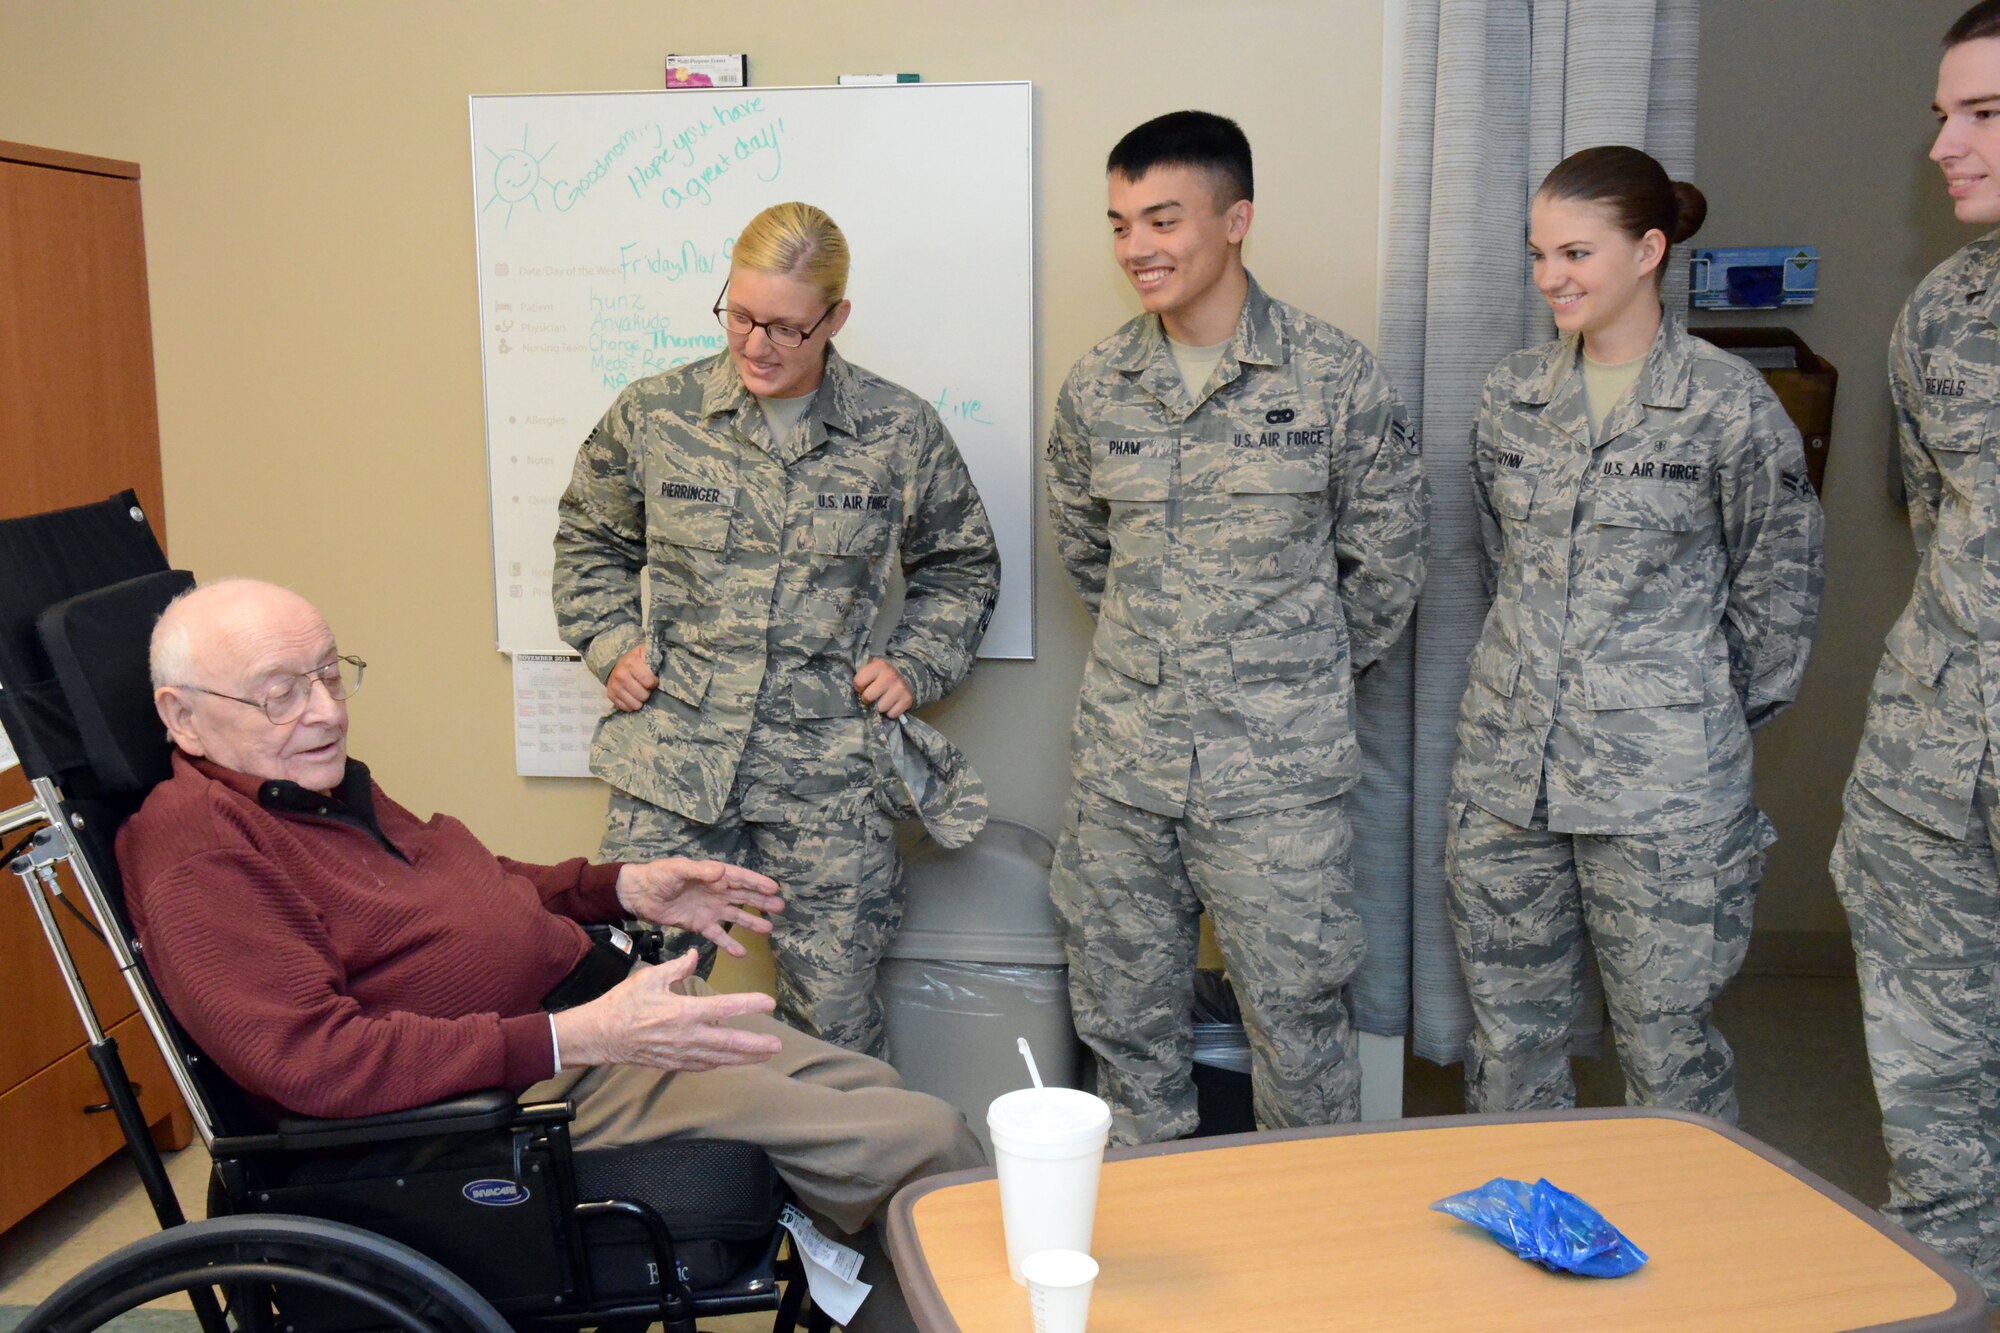 Airman Hannah Pierringer and Airmen 1st Class Cuong Pham, Brittany Guynn and Alexander Revels, 78th Air Base Wing, visit with WWII Army Veteran  Clarence Kunz, during the Veterans Day celebration at Carl Vinson VA Medical Center in Dublin Georgia.(U. S. Air Force photo/Ed Aspera)